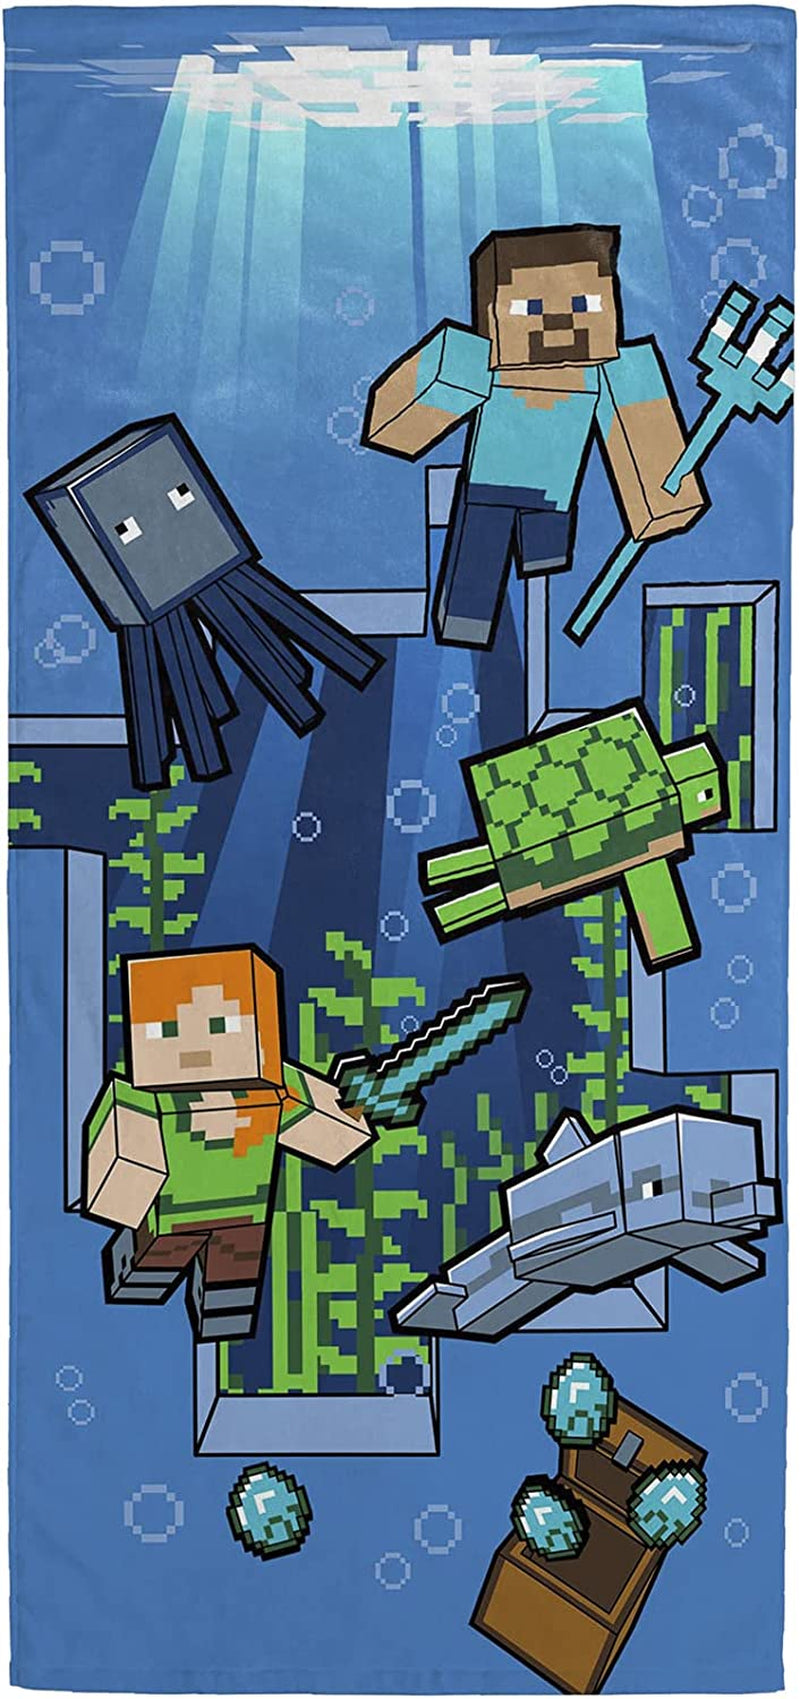 Jay Franco Minecraft Underwater Adventure Bath/Pool/Beach Towel - Super Soft & Absorbent Fade Resistant Cotton Towel Features Alex & Steve, Measures 28 X 58 Inches (Official Minecraft Product) Home & Garden > Linens & Bedding > Towels Jay Franco & Sons, Inc. Blue - Minecraft  